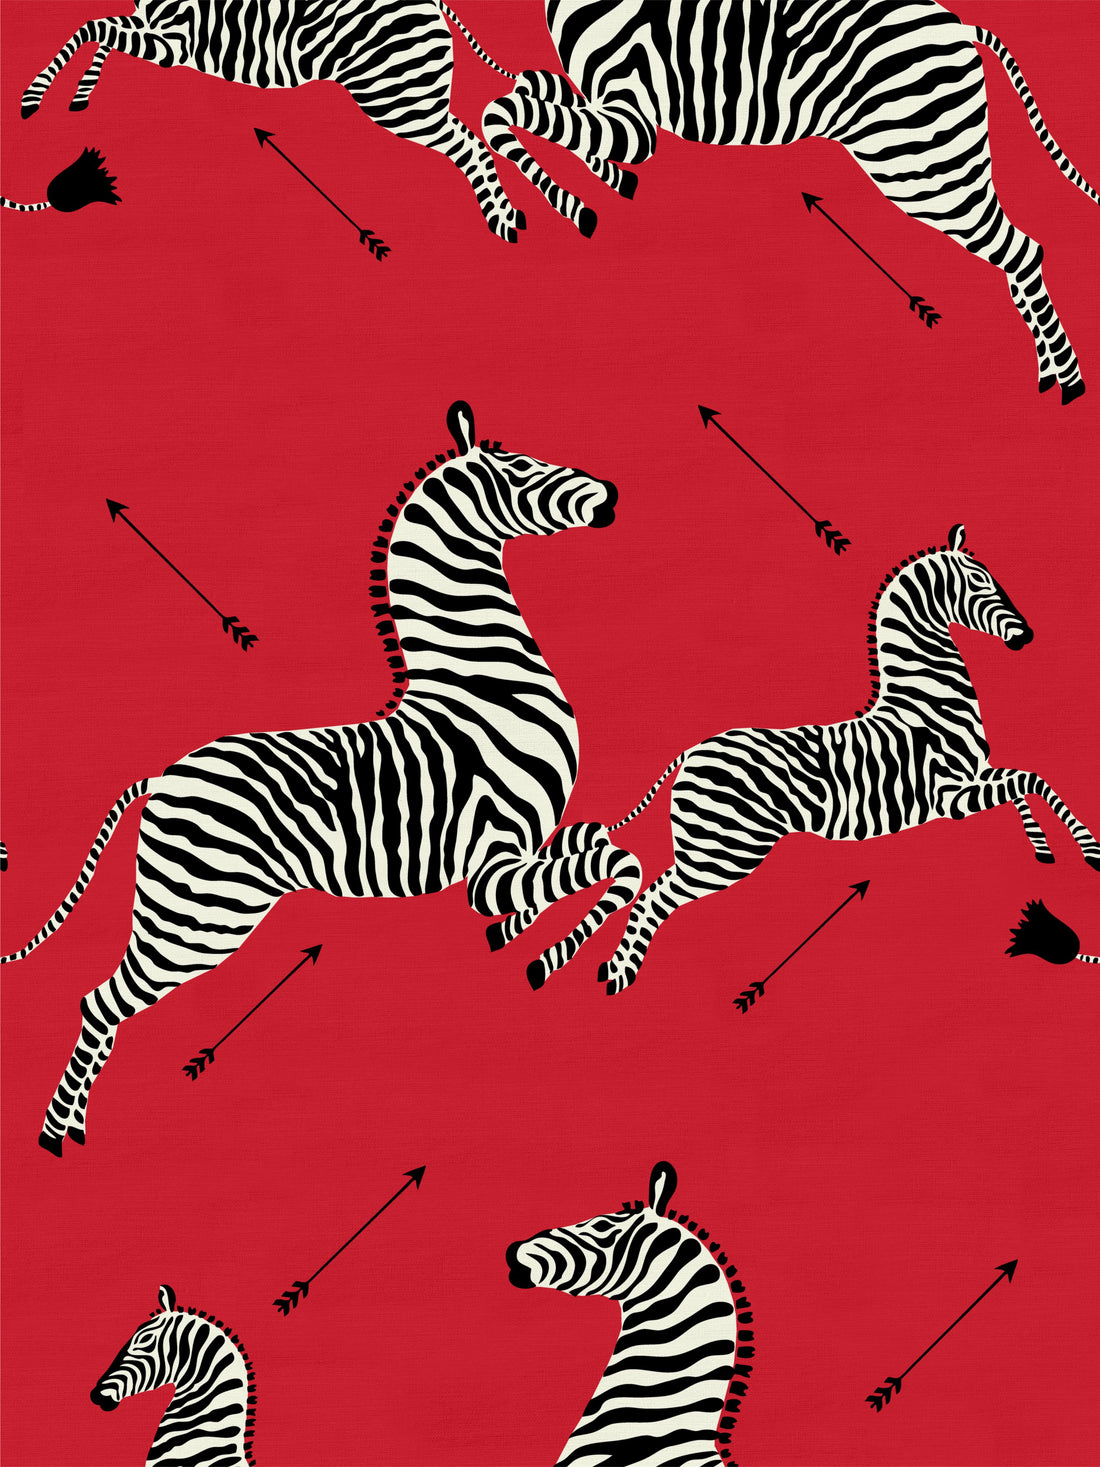 Zebras Outdoor fabric in masai red color - pattern number SC 000136378 - by Scalamandre in the Scalamandre Fabrics Book 1 collection